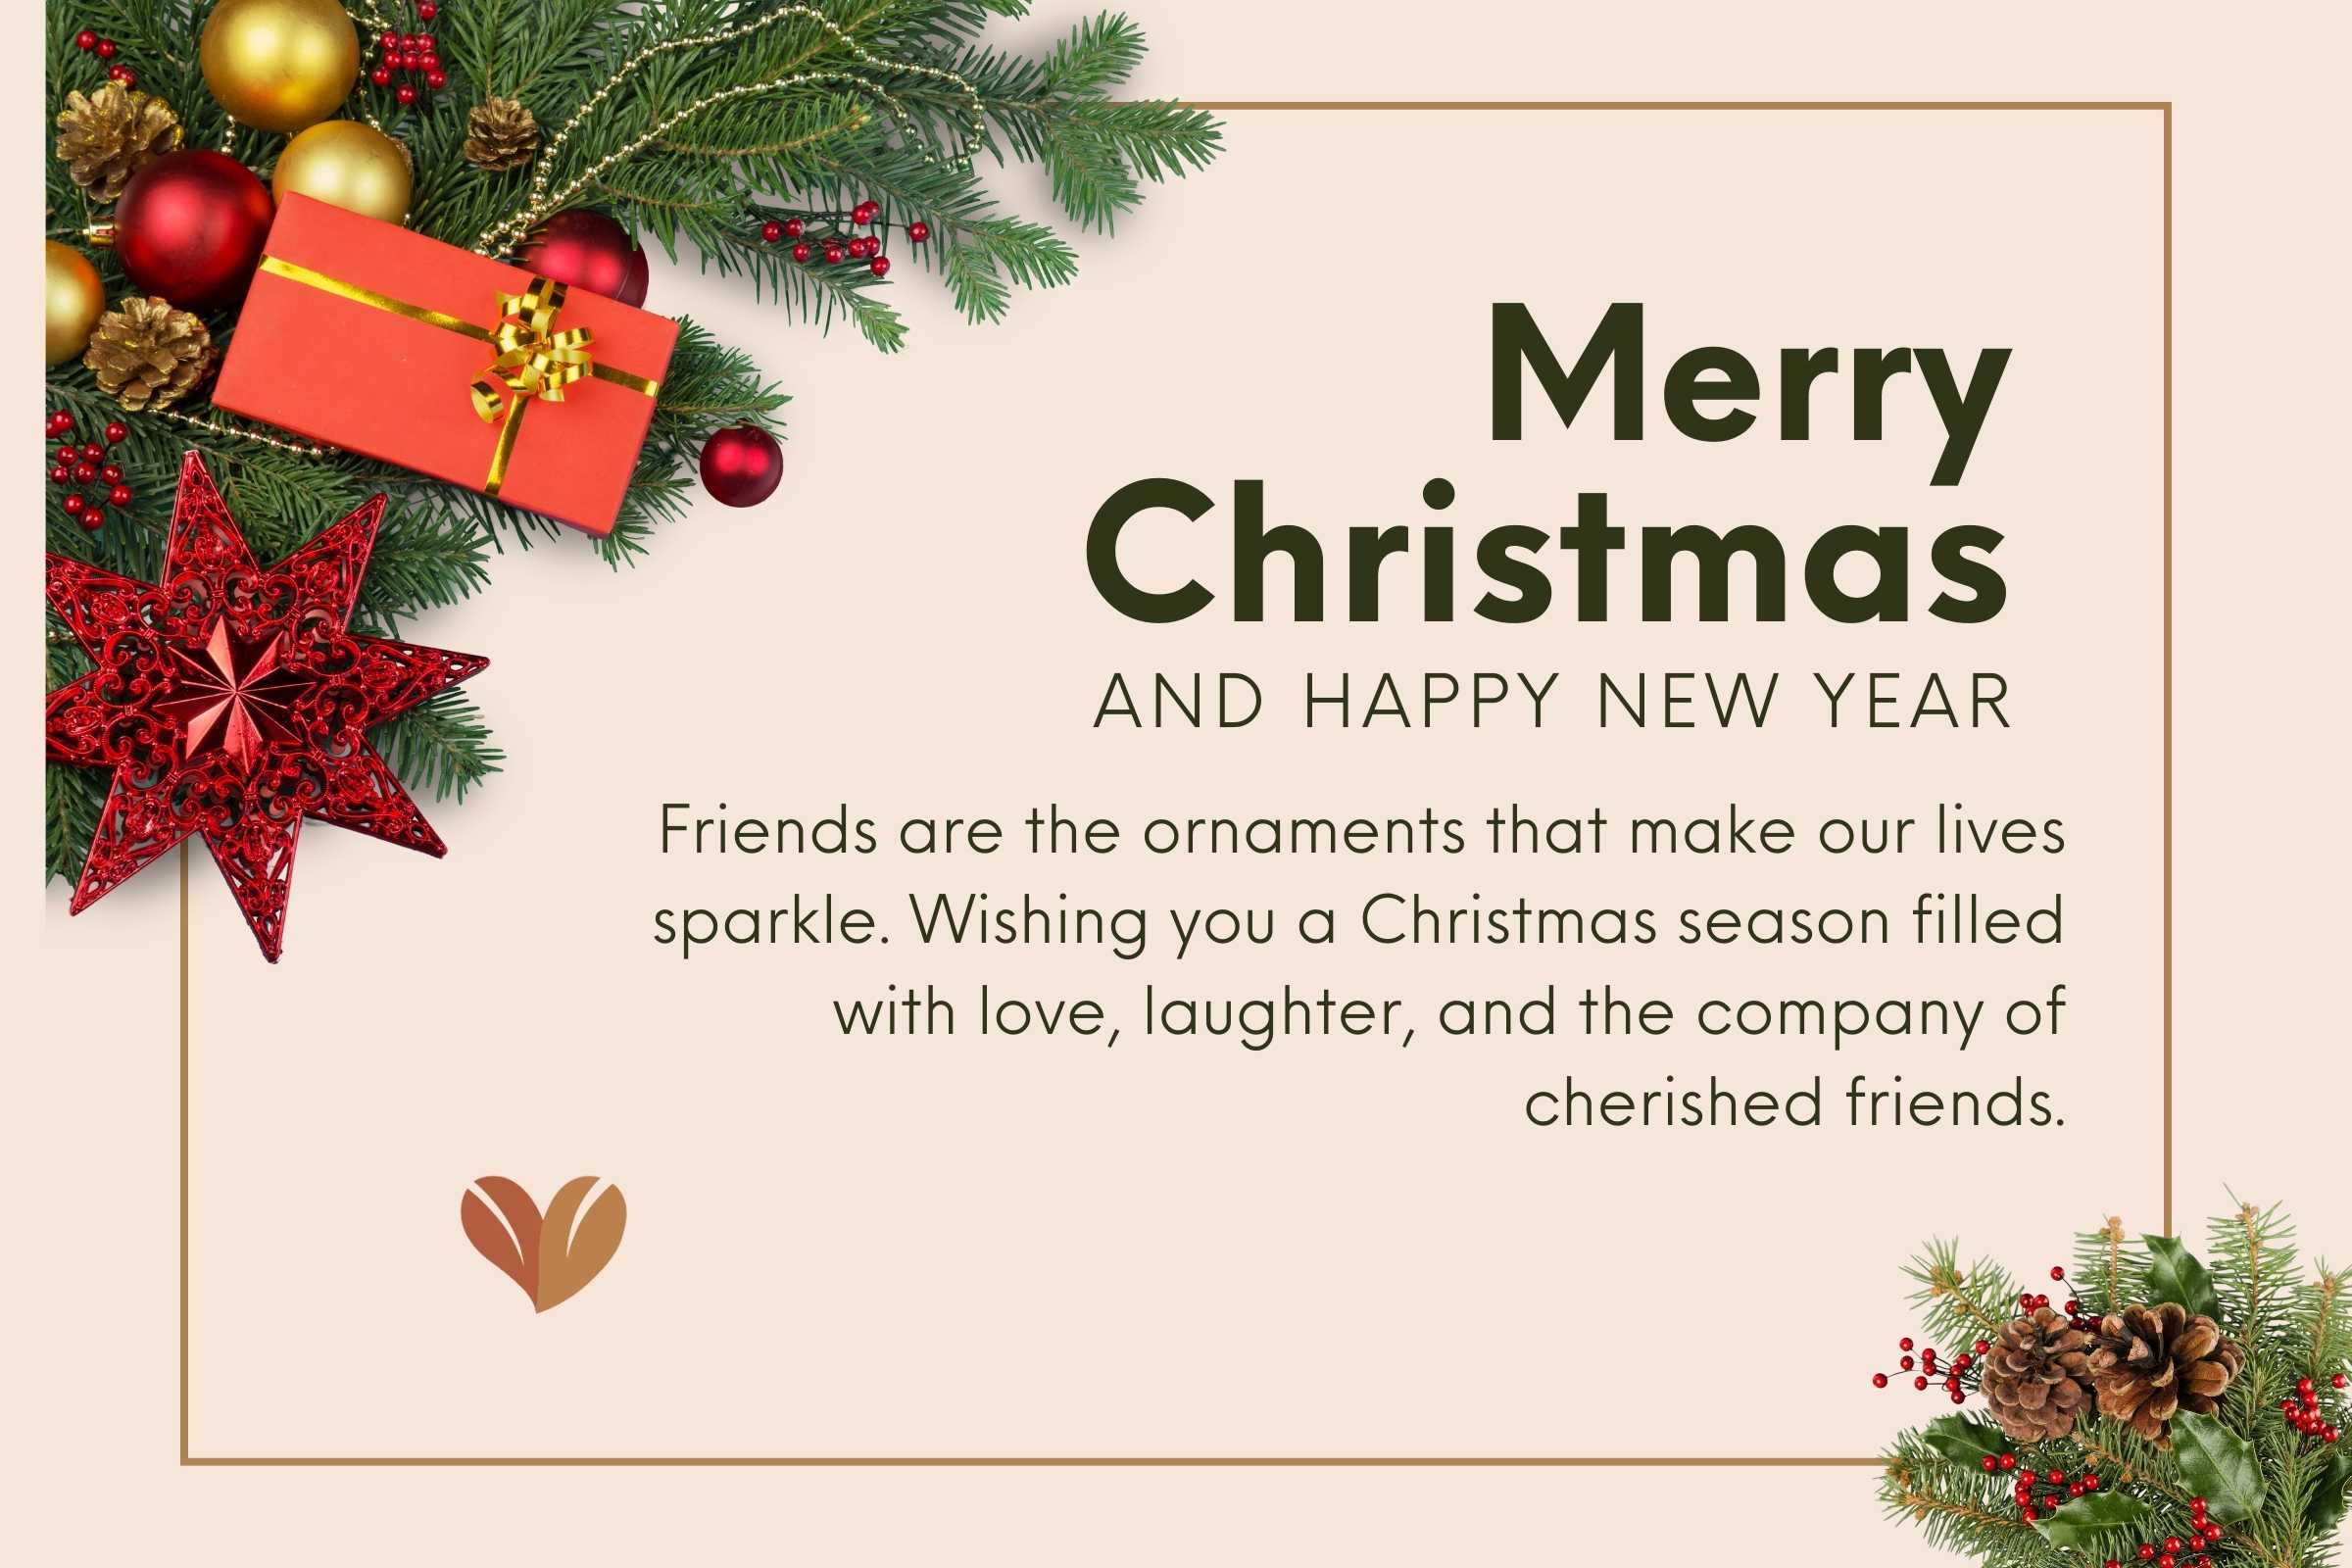 Christmas wishes for friends - Wishing you a Christmas season filled with love 